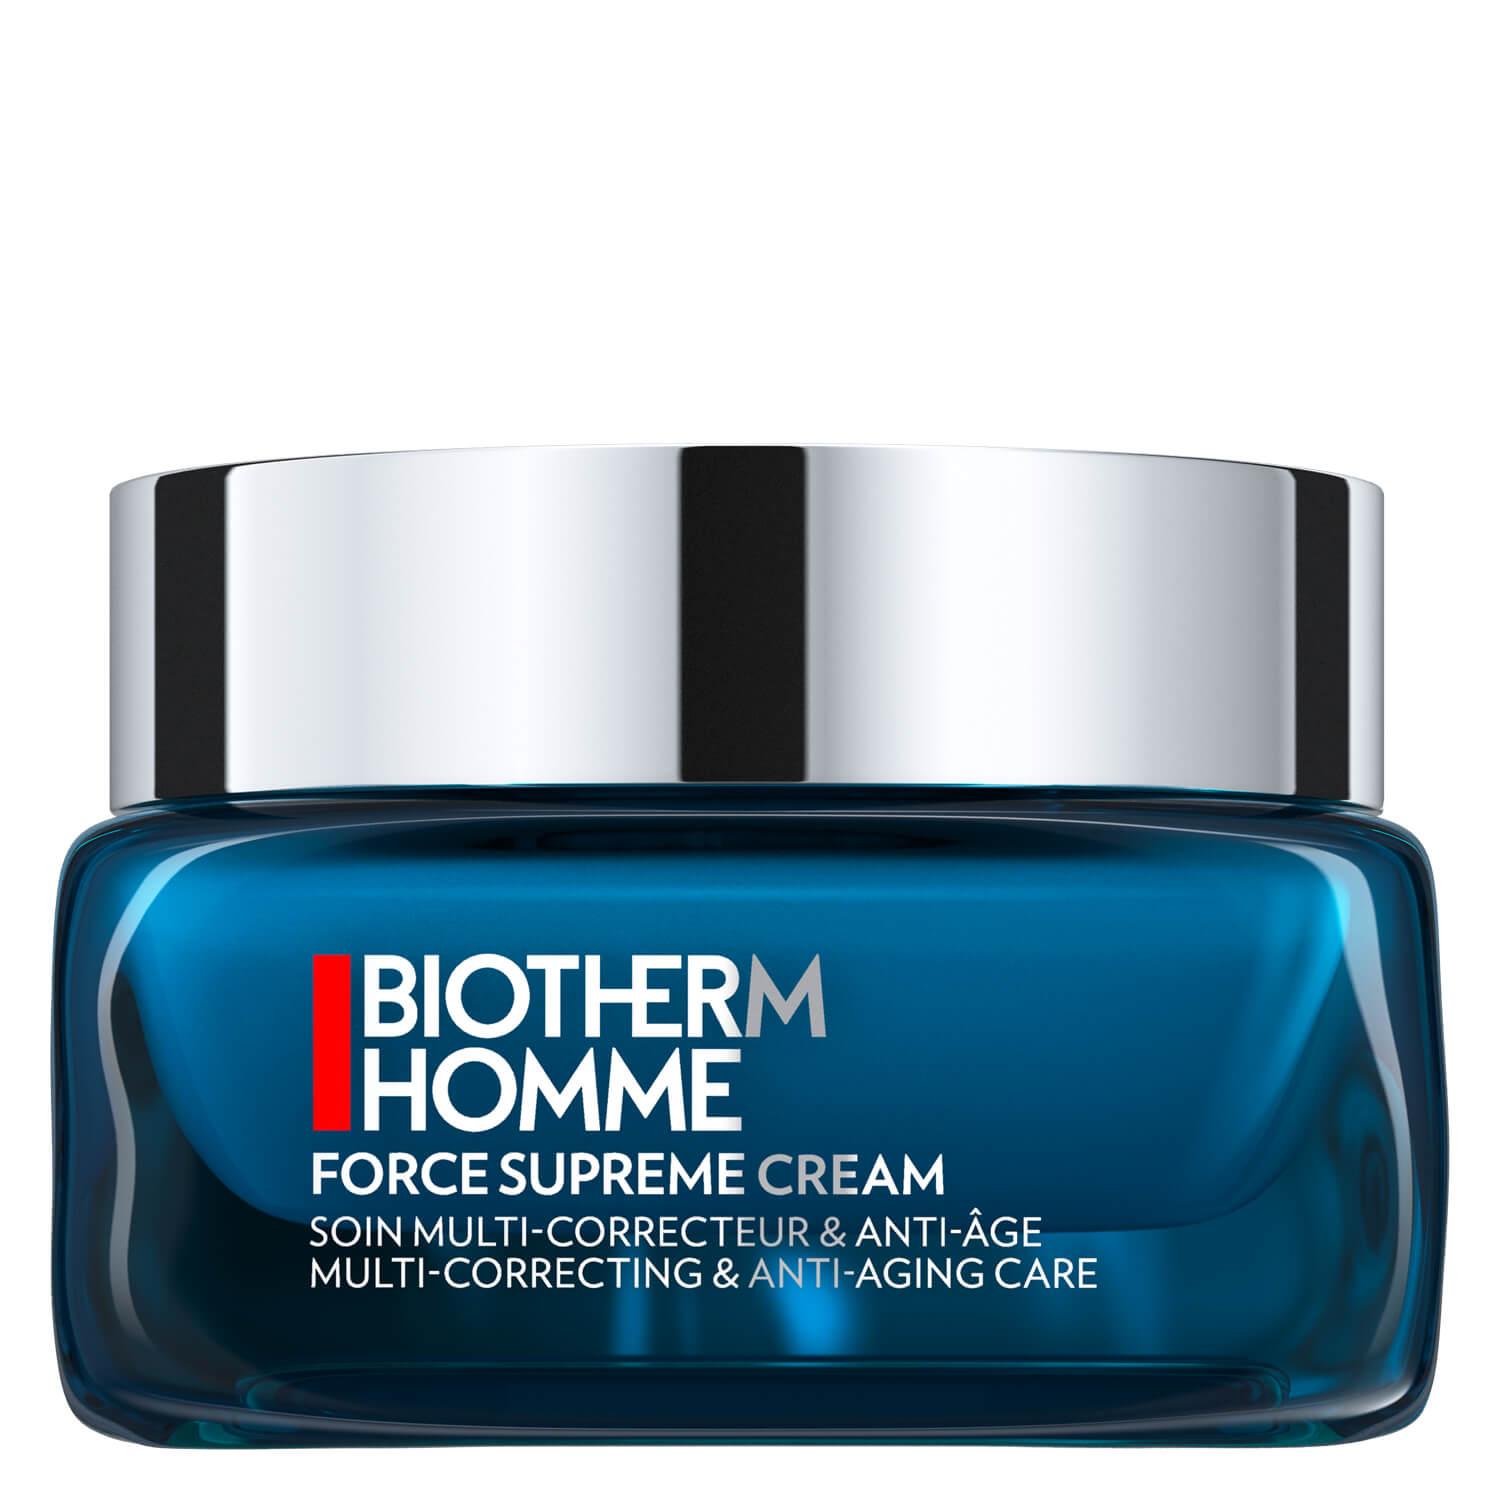 Biotherm Homme - Force Supreme Cream